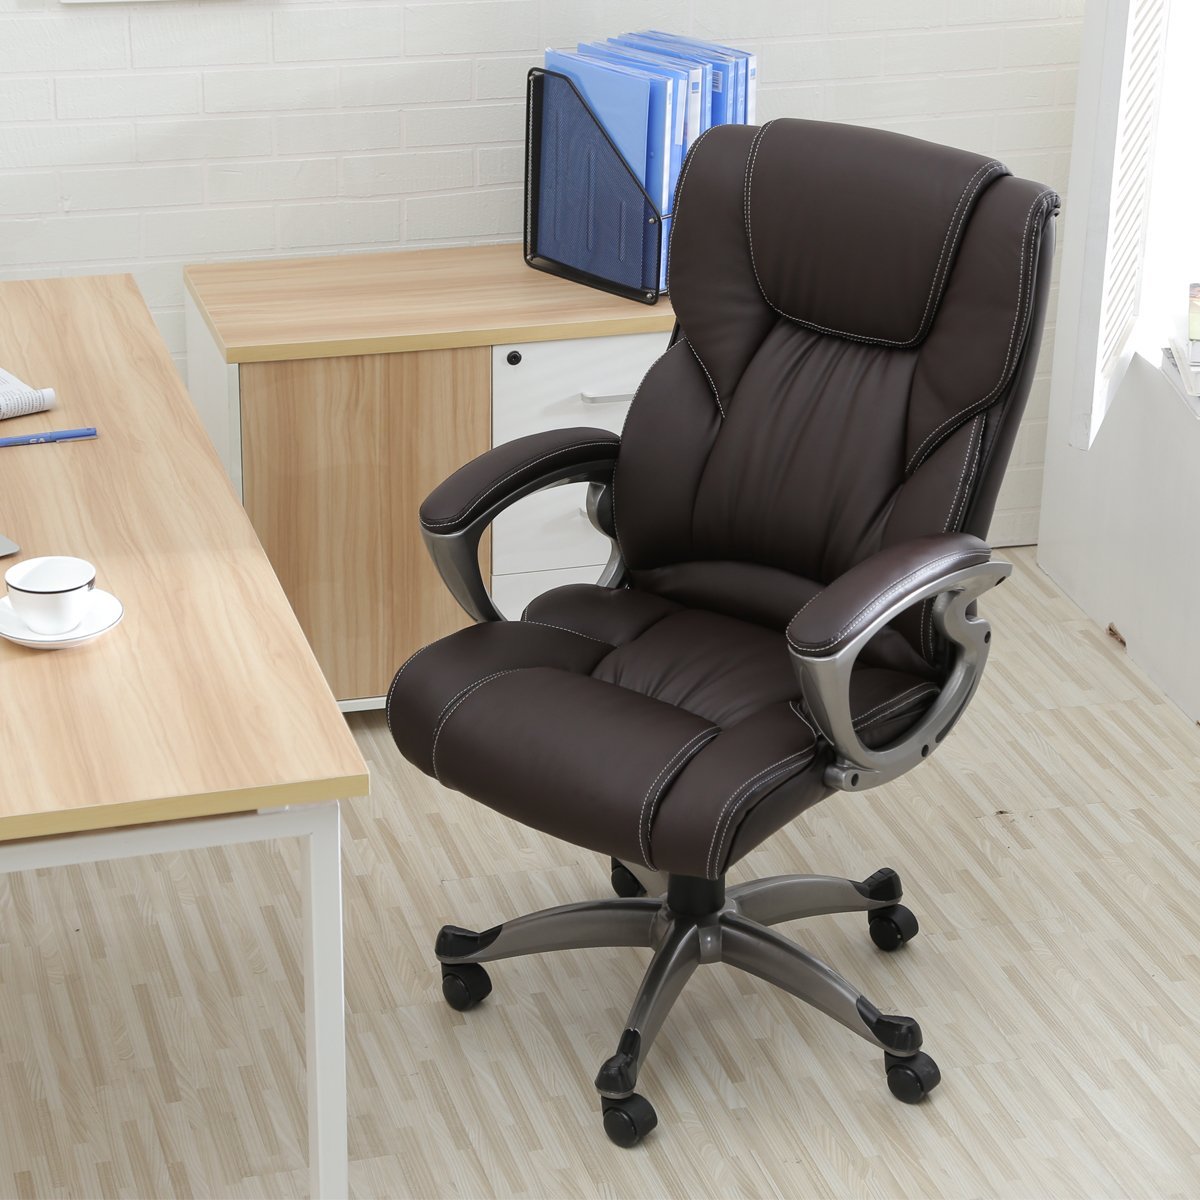 Mykas Ergonomic Leather Executive Office Chair High Back Computer Chair With Upholstered Armrest 